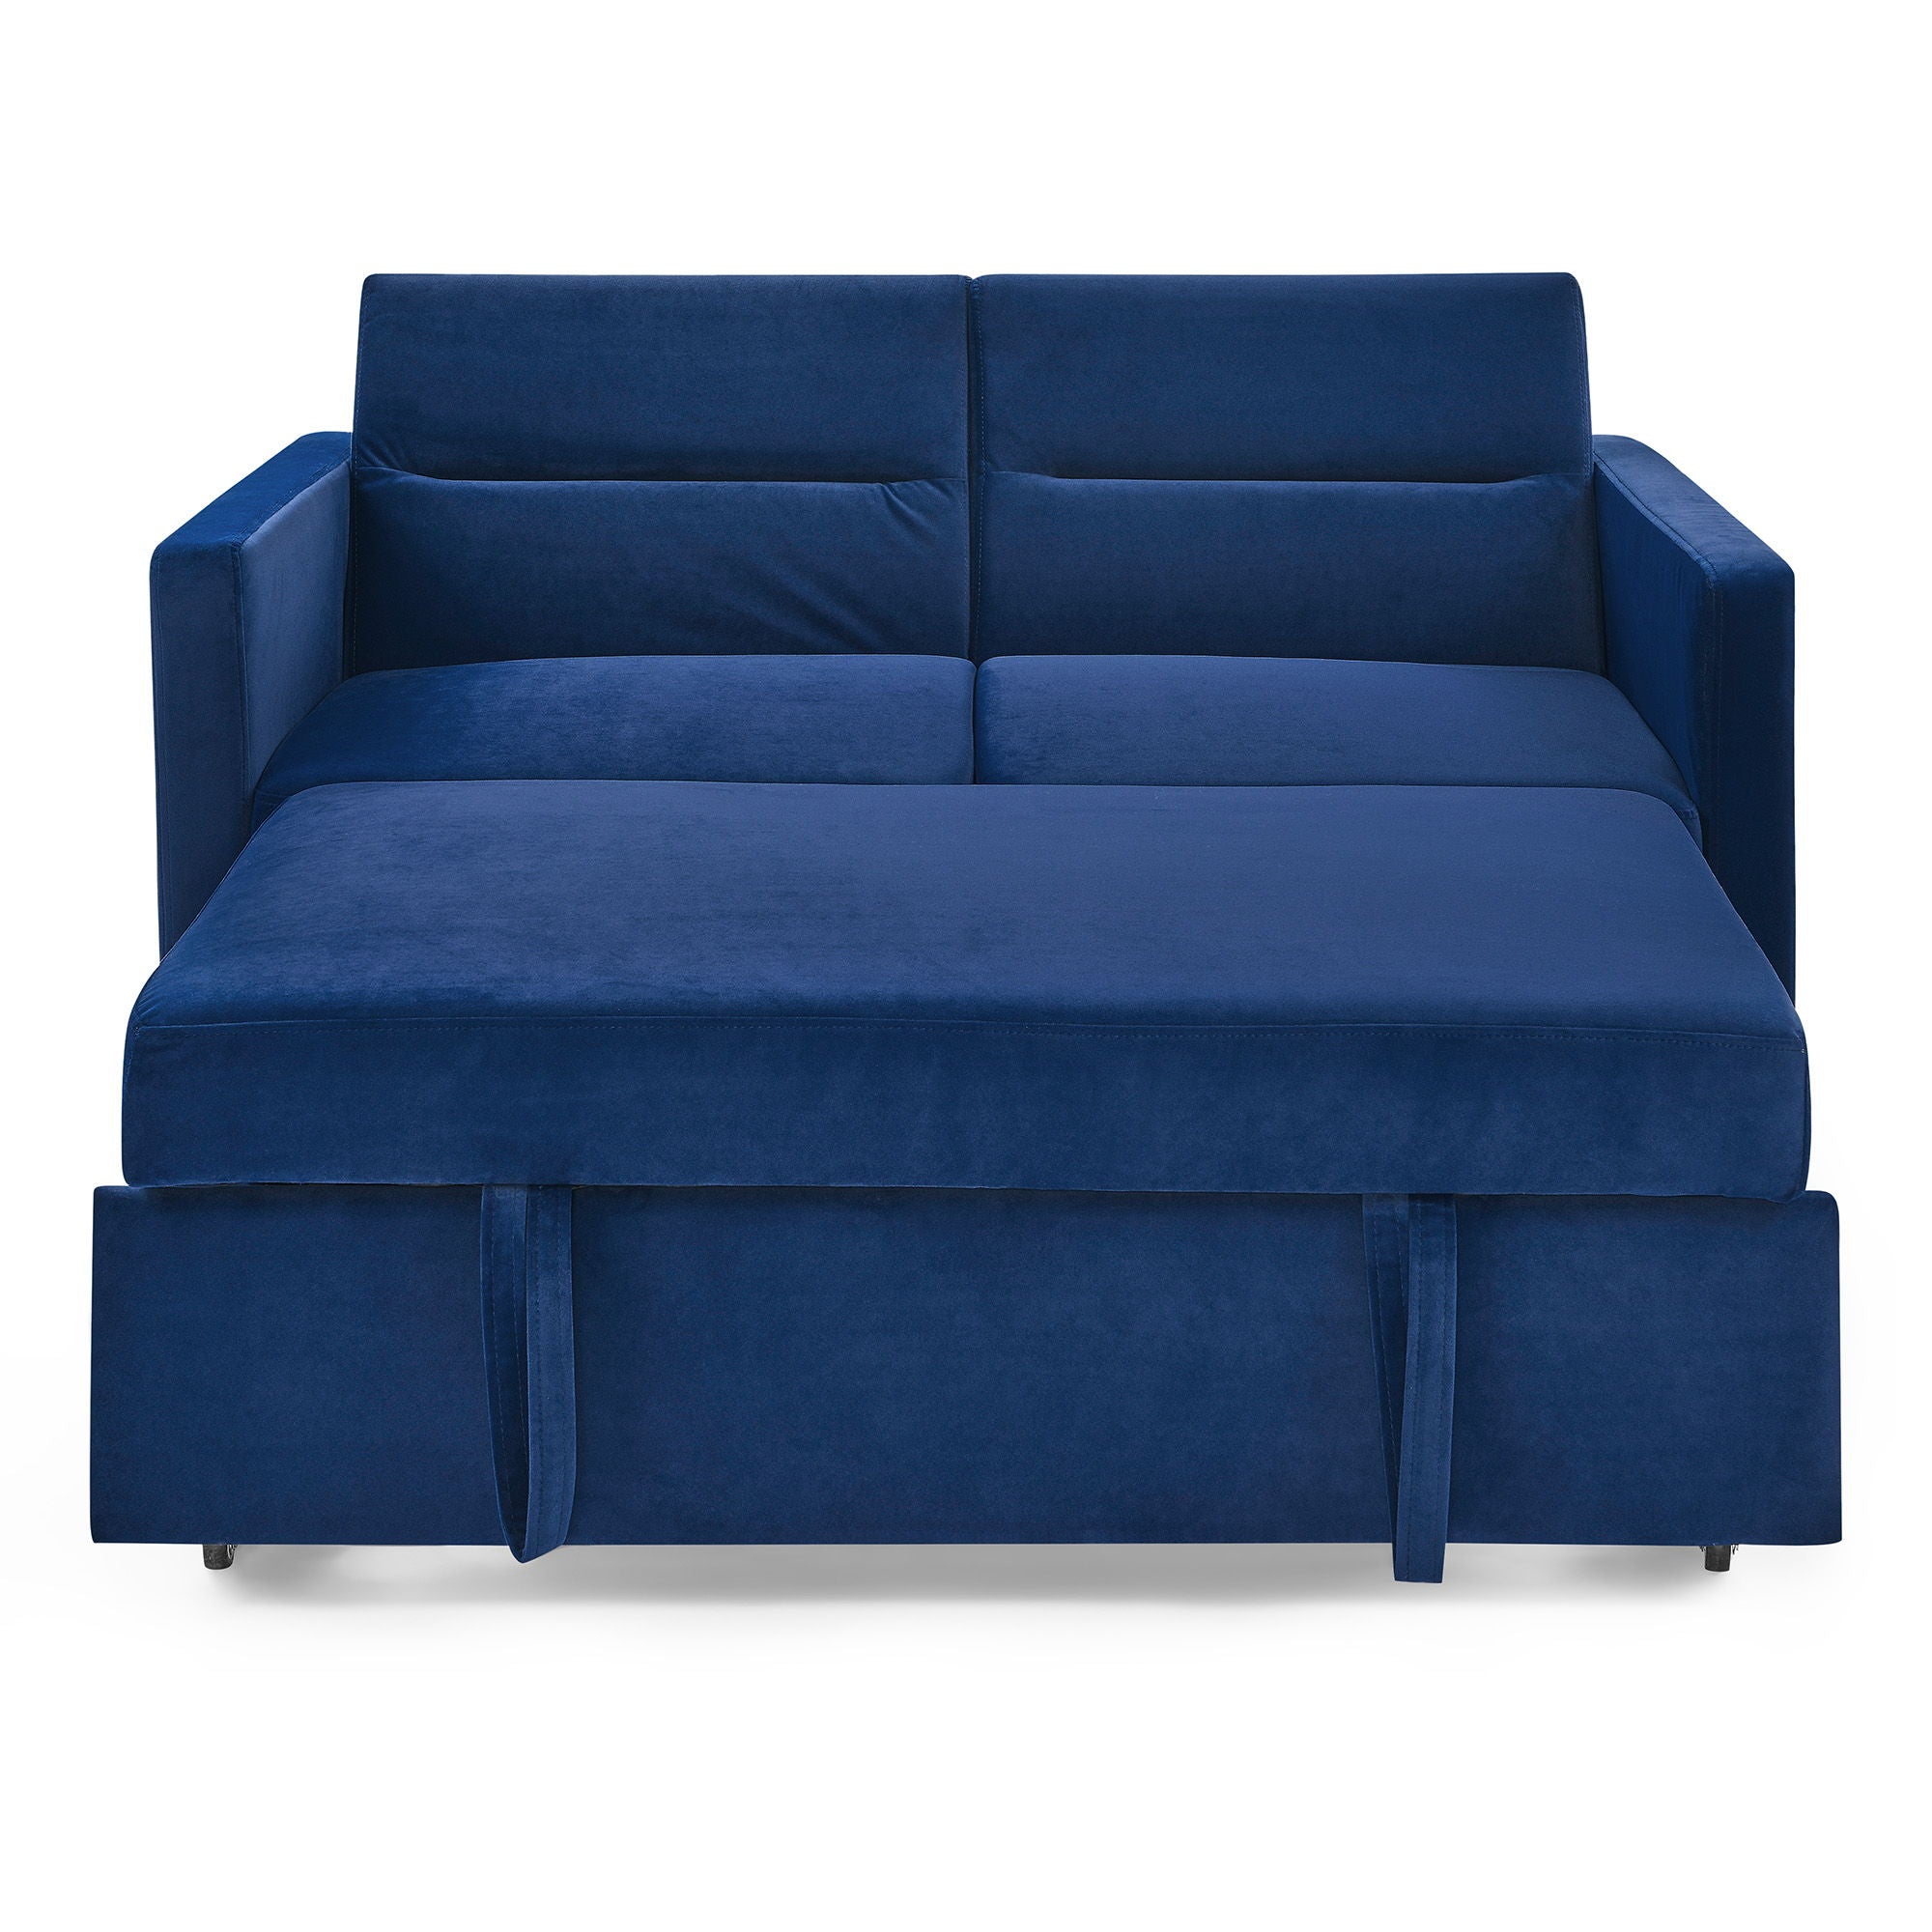 Loveseats Sofa Bed With Pull - Out Bed Adjsutable Back And Two Arm Pocket - Blue